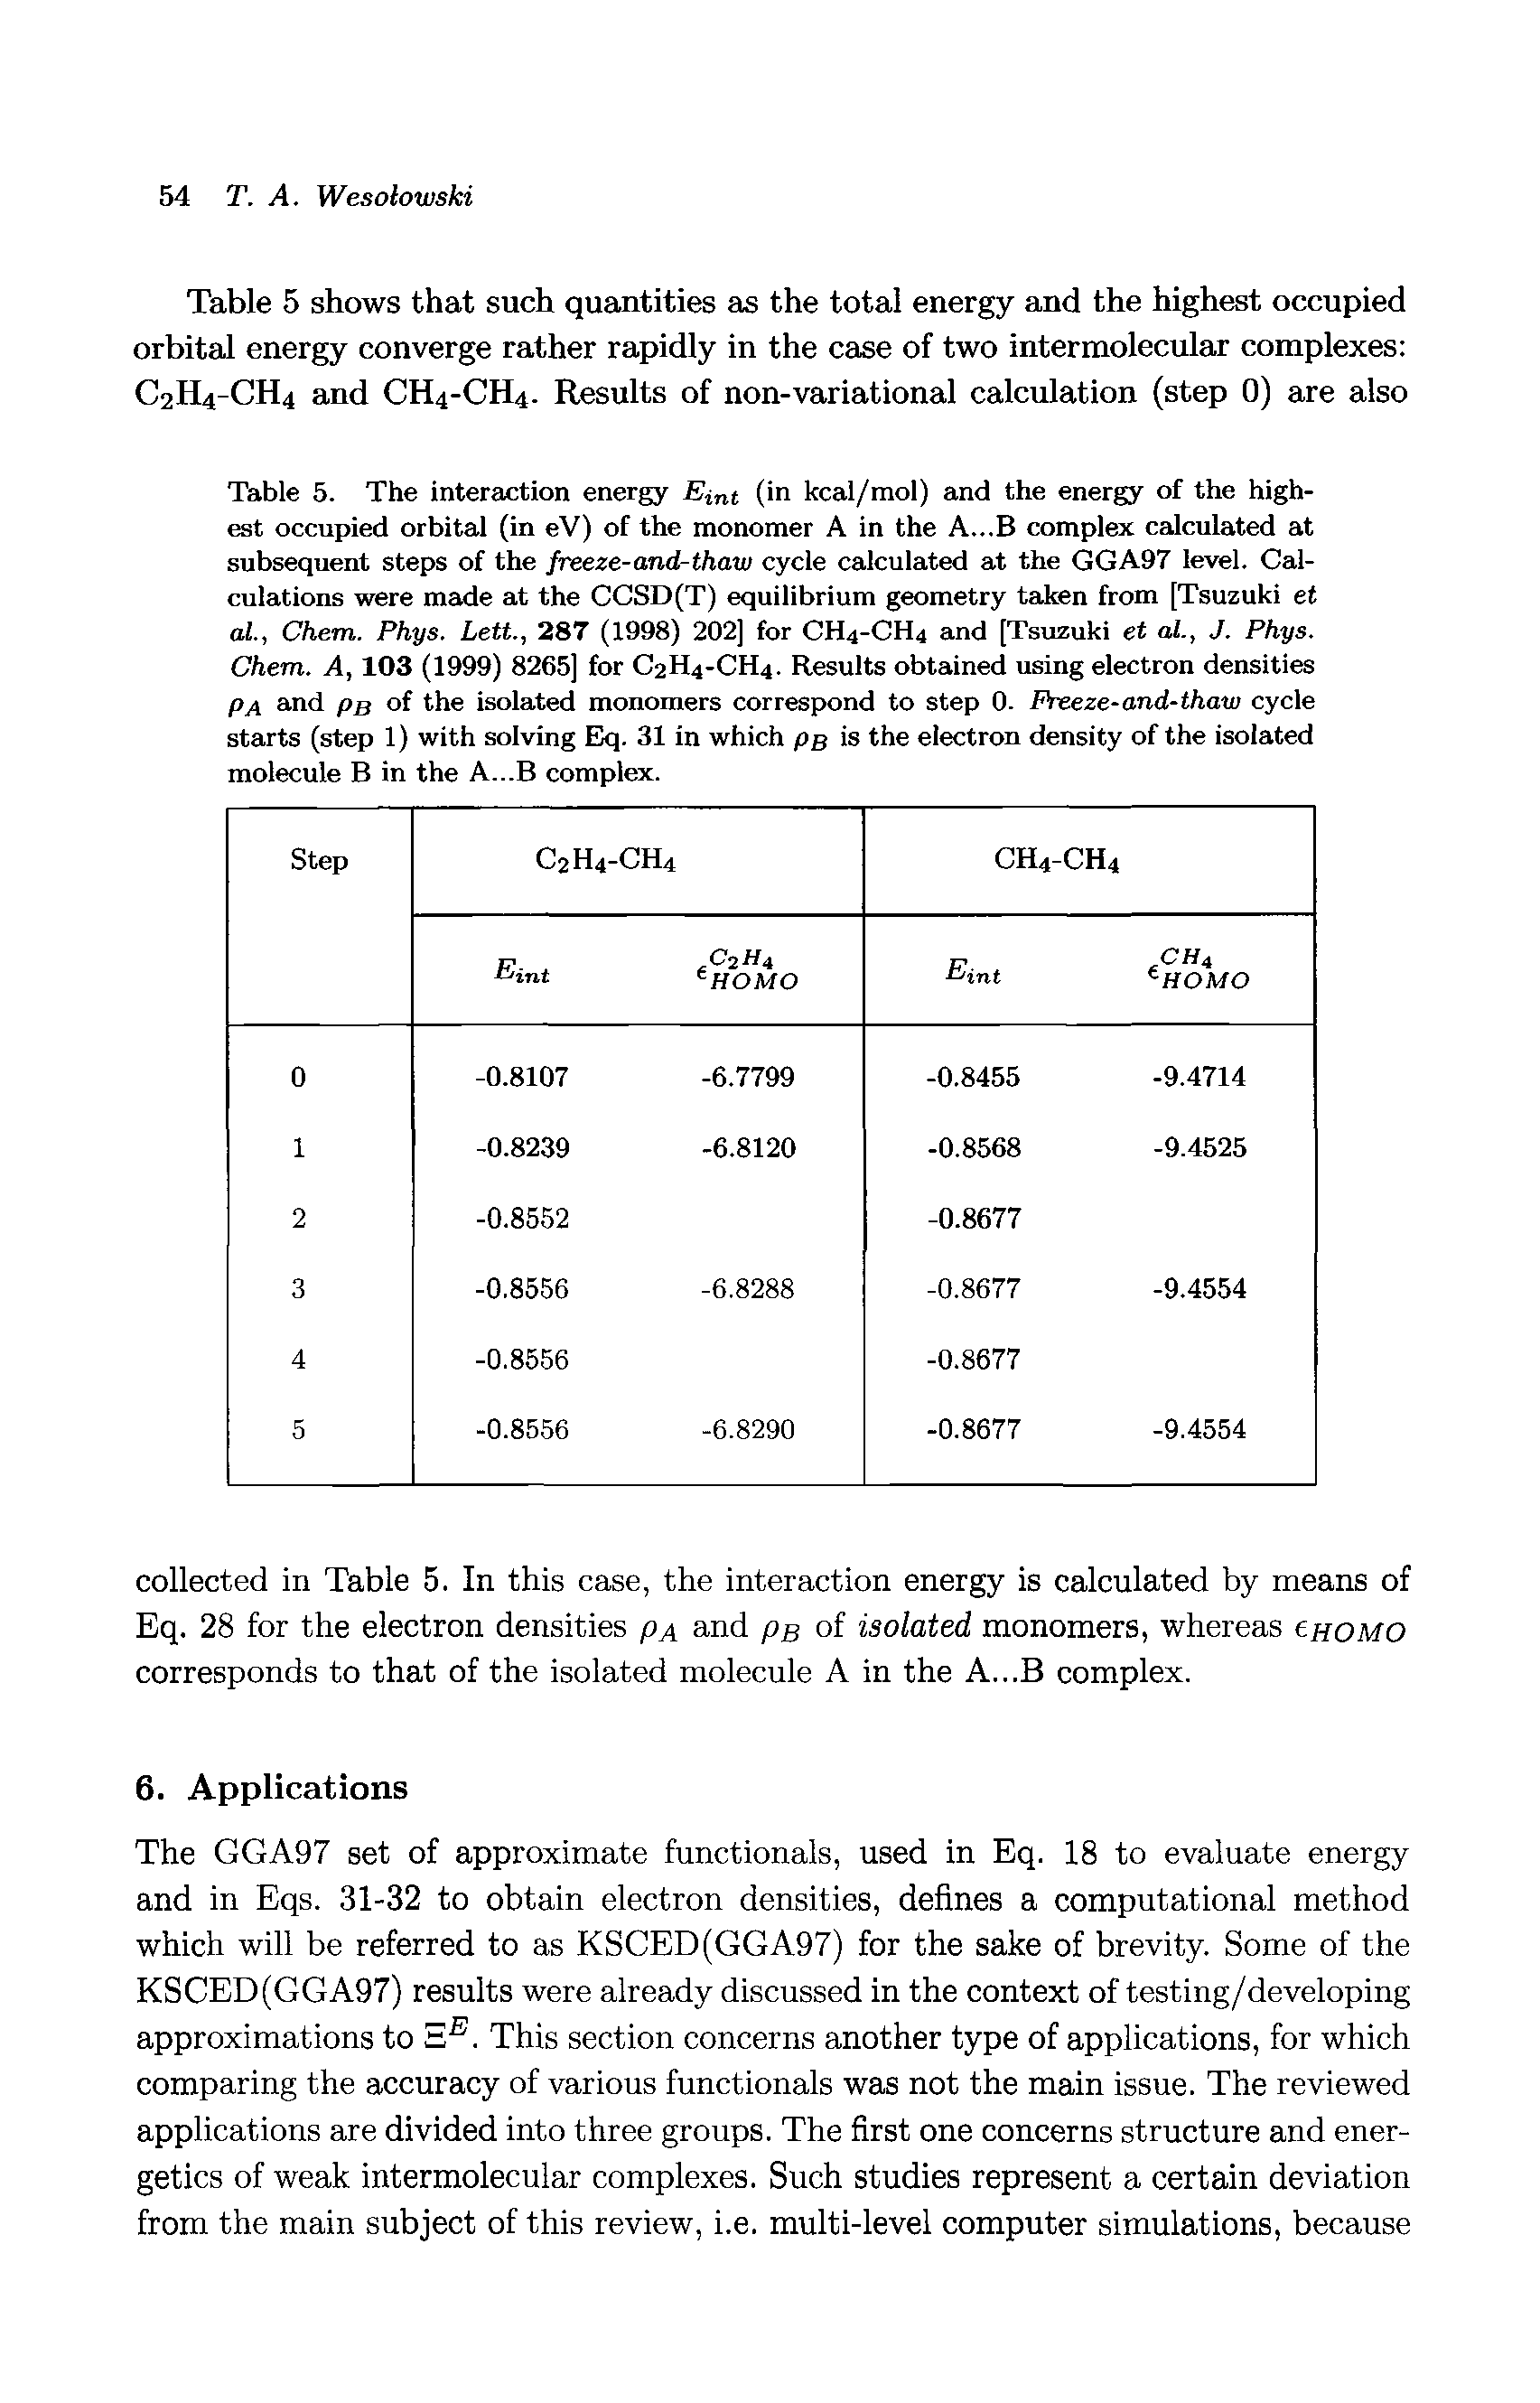 Table 5. The interaction energy Ei t (in kcal/mol) and the energy of the highest occupied orbital (in eV) of the monomer A in the A...B complex calculated at subsequent steps of the freeze-and-thaw cycle calculated at the GGA97 level. Calculations were made at the CCSD(T) equilibrium geometry taken from [Tsuzuki et al., Chem. Phys. Lett., 287 (1998) 202] for CH4-CH4 and [Tsuzuki et at., J. Phys.